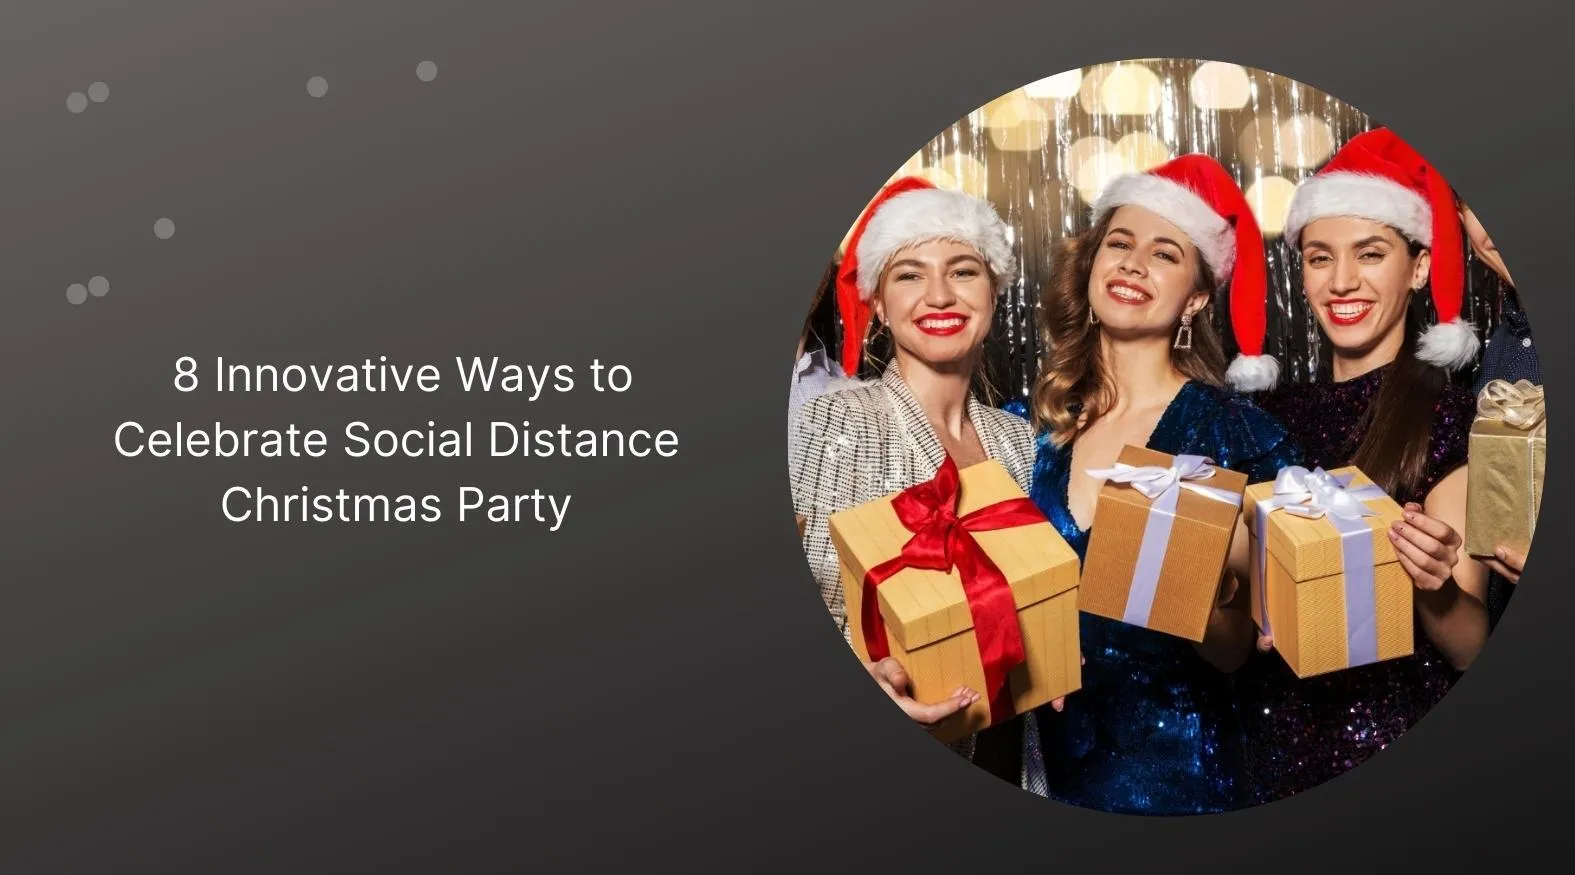 8 Innovative Ways to Celebrate Social Distance Christmas Party